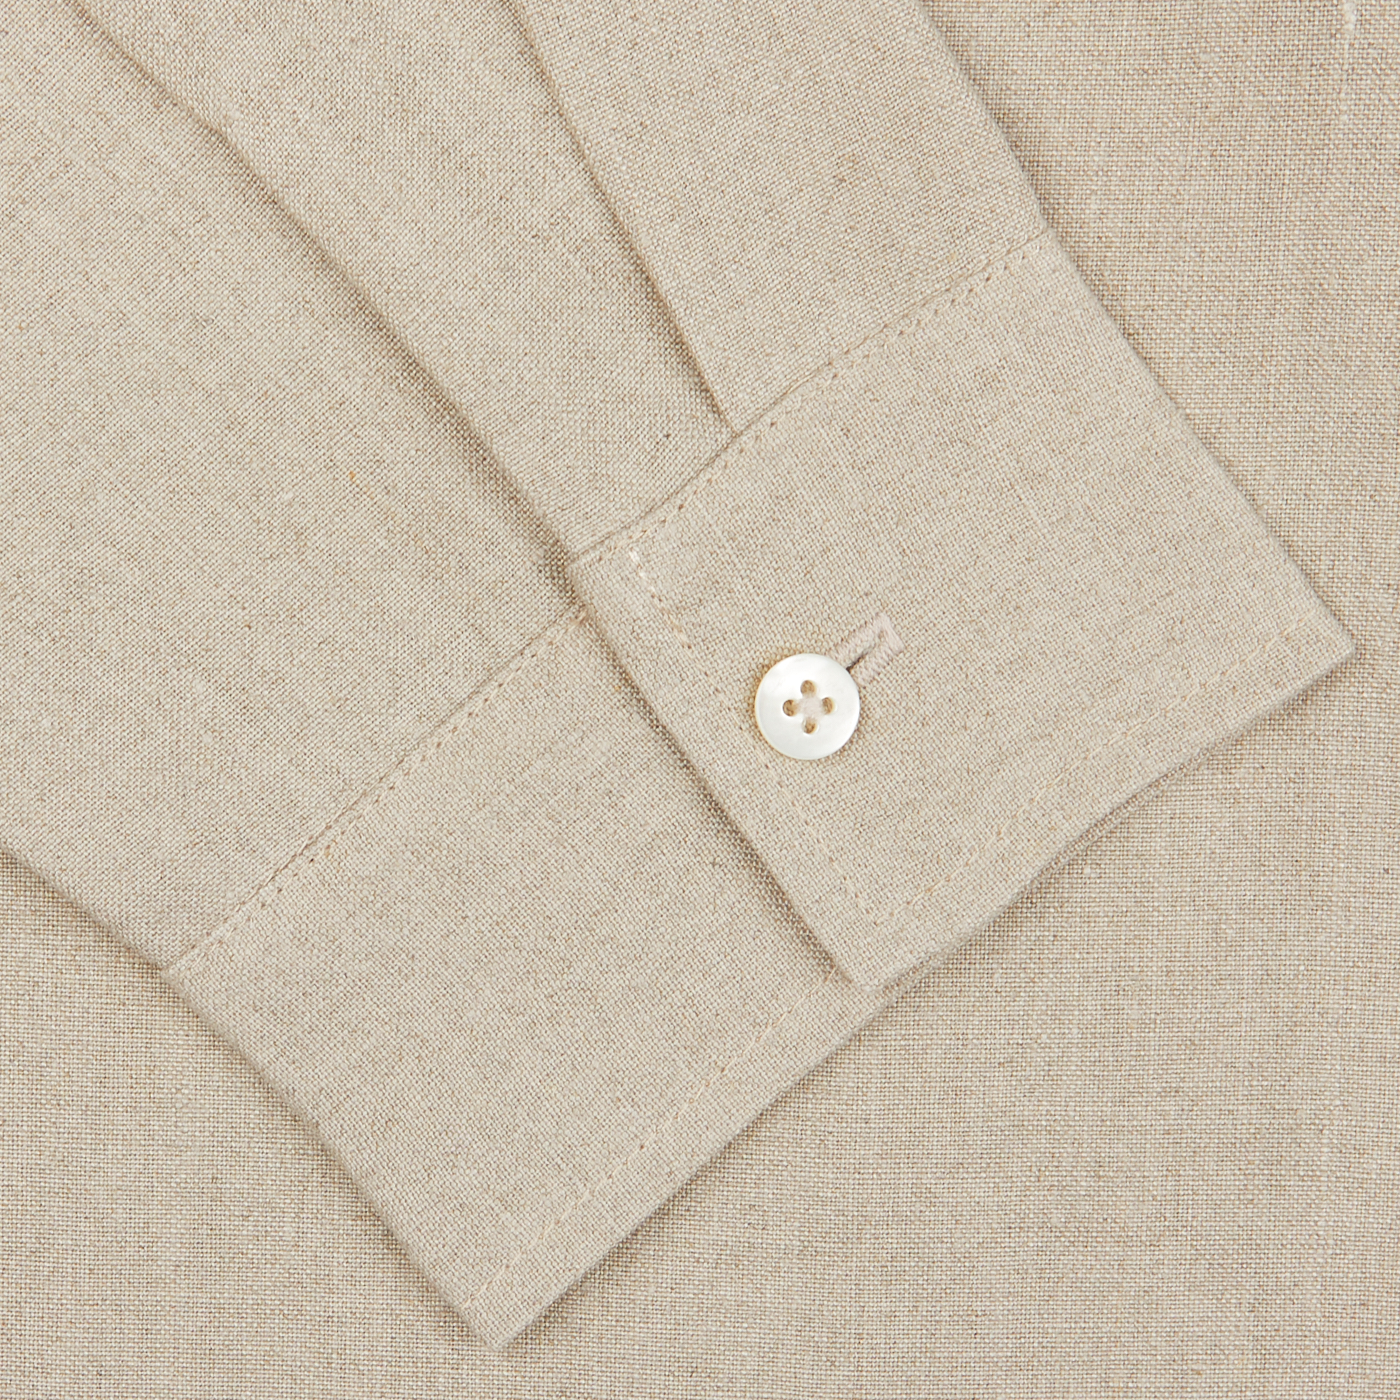 Close-up of a De Bonne Facture oatmeal beige linen canvas painter’s jacket with a detailed view of a cuff featuring a button, showcasing the texture and stitching.